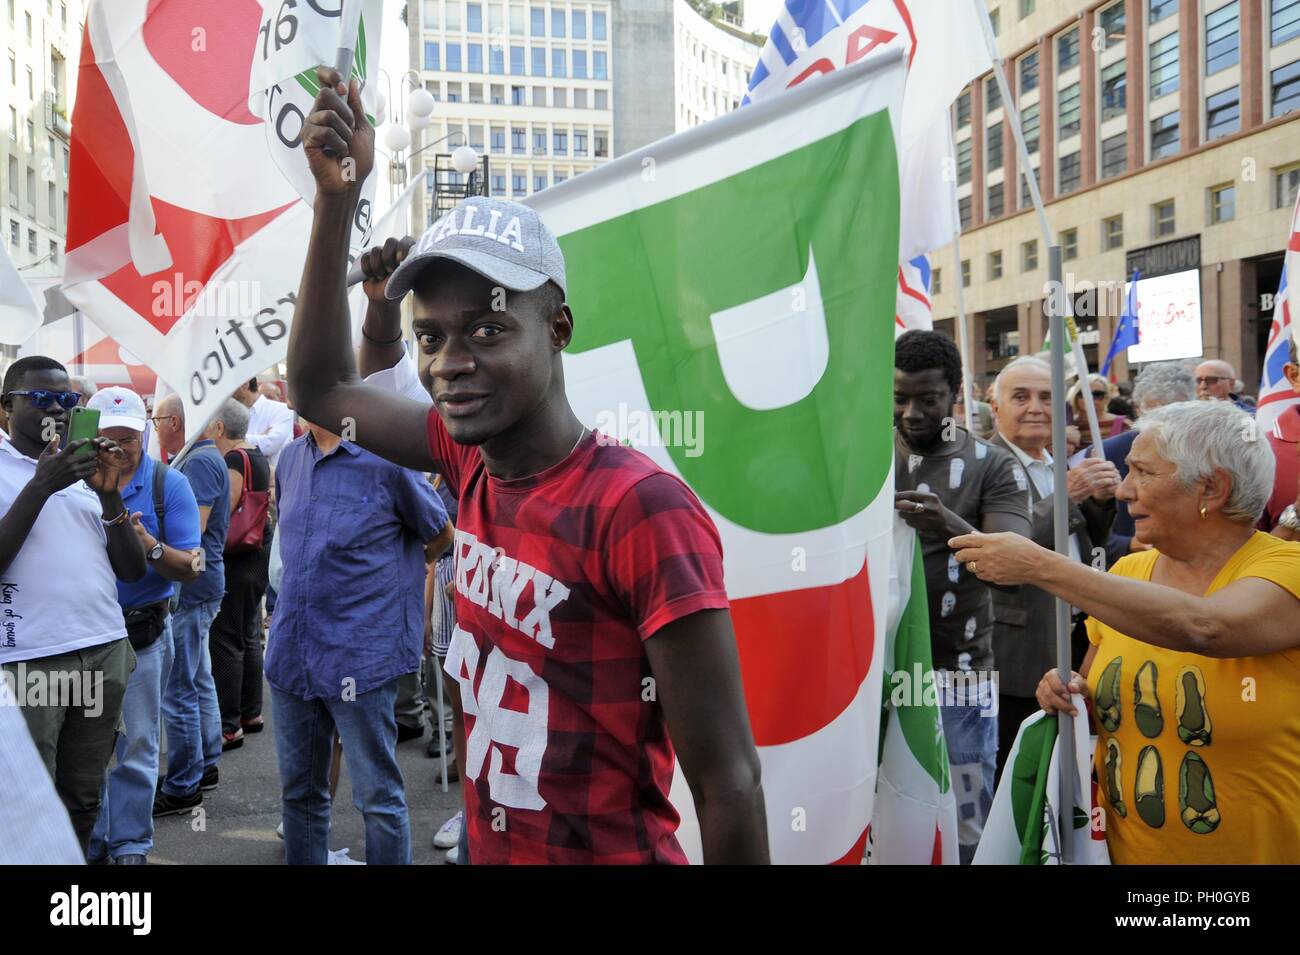 Milan (Italy), 28 August 2018, anti-fascist and anti-racist demonstration called by numerous left-wing and democratic parties and organizations to mark the meeting in the prefecture of Matteo Salvini, minister of the interior and leader of the right-wing party Lega, with the Hungarian premier Viktor Orban. Stock Photo